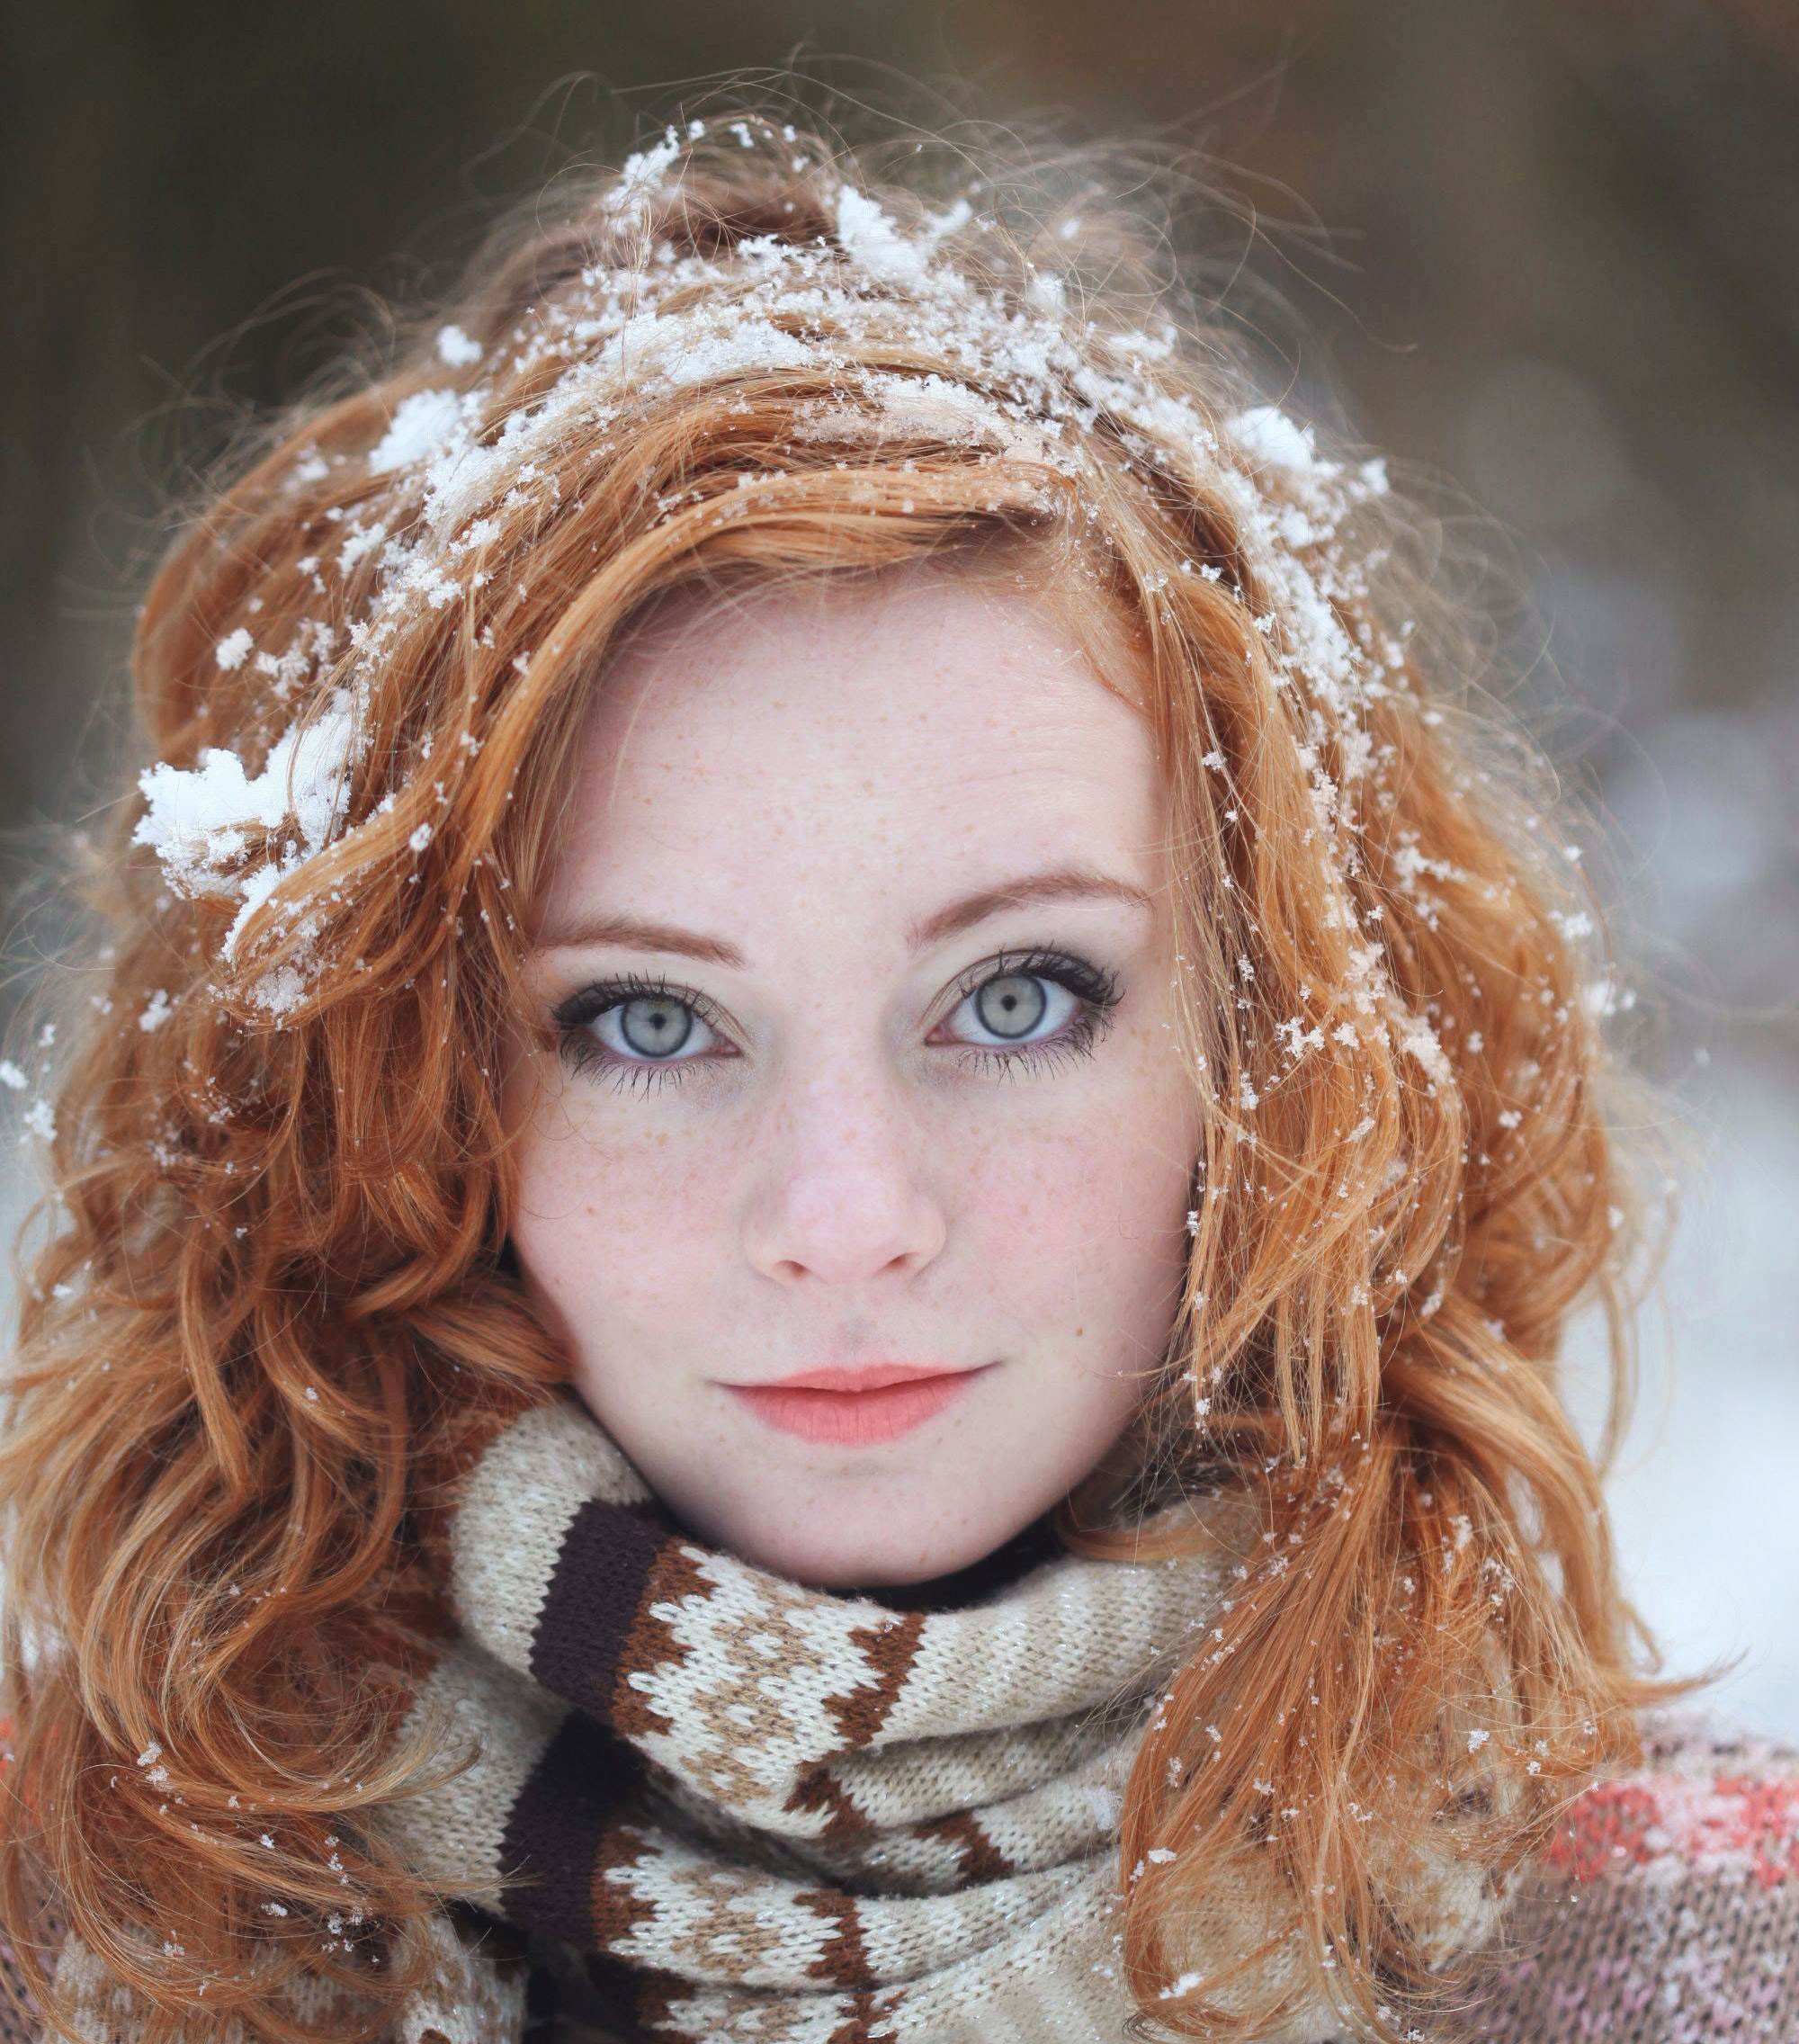 People 2000x2272 women long hair scarf portrait pale gray eyes smiling snow winter freckles Freyja Vanden Broucke cold women outdoors outdoors looking at viewer